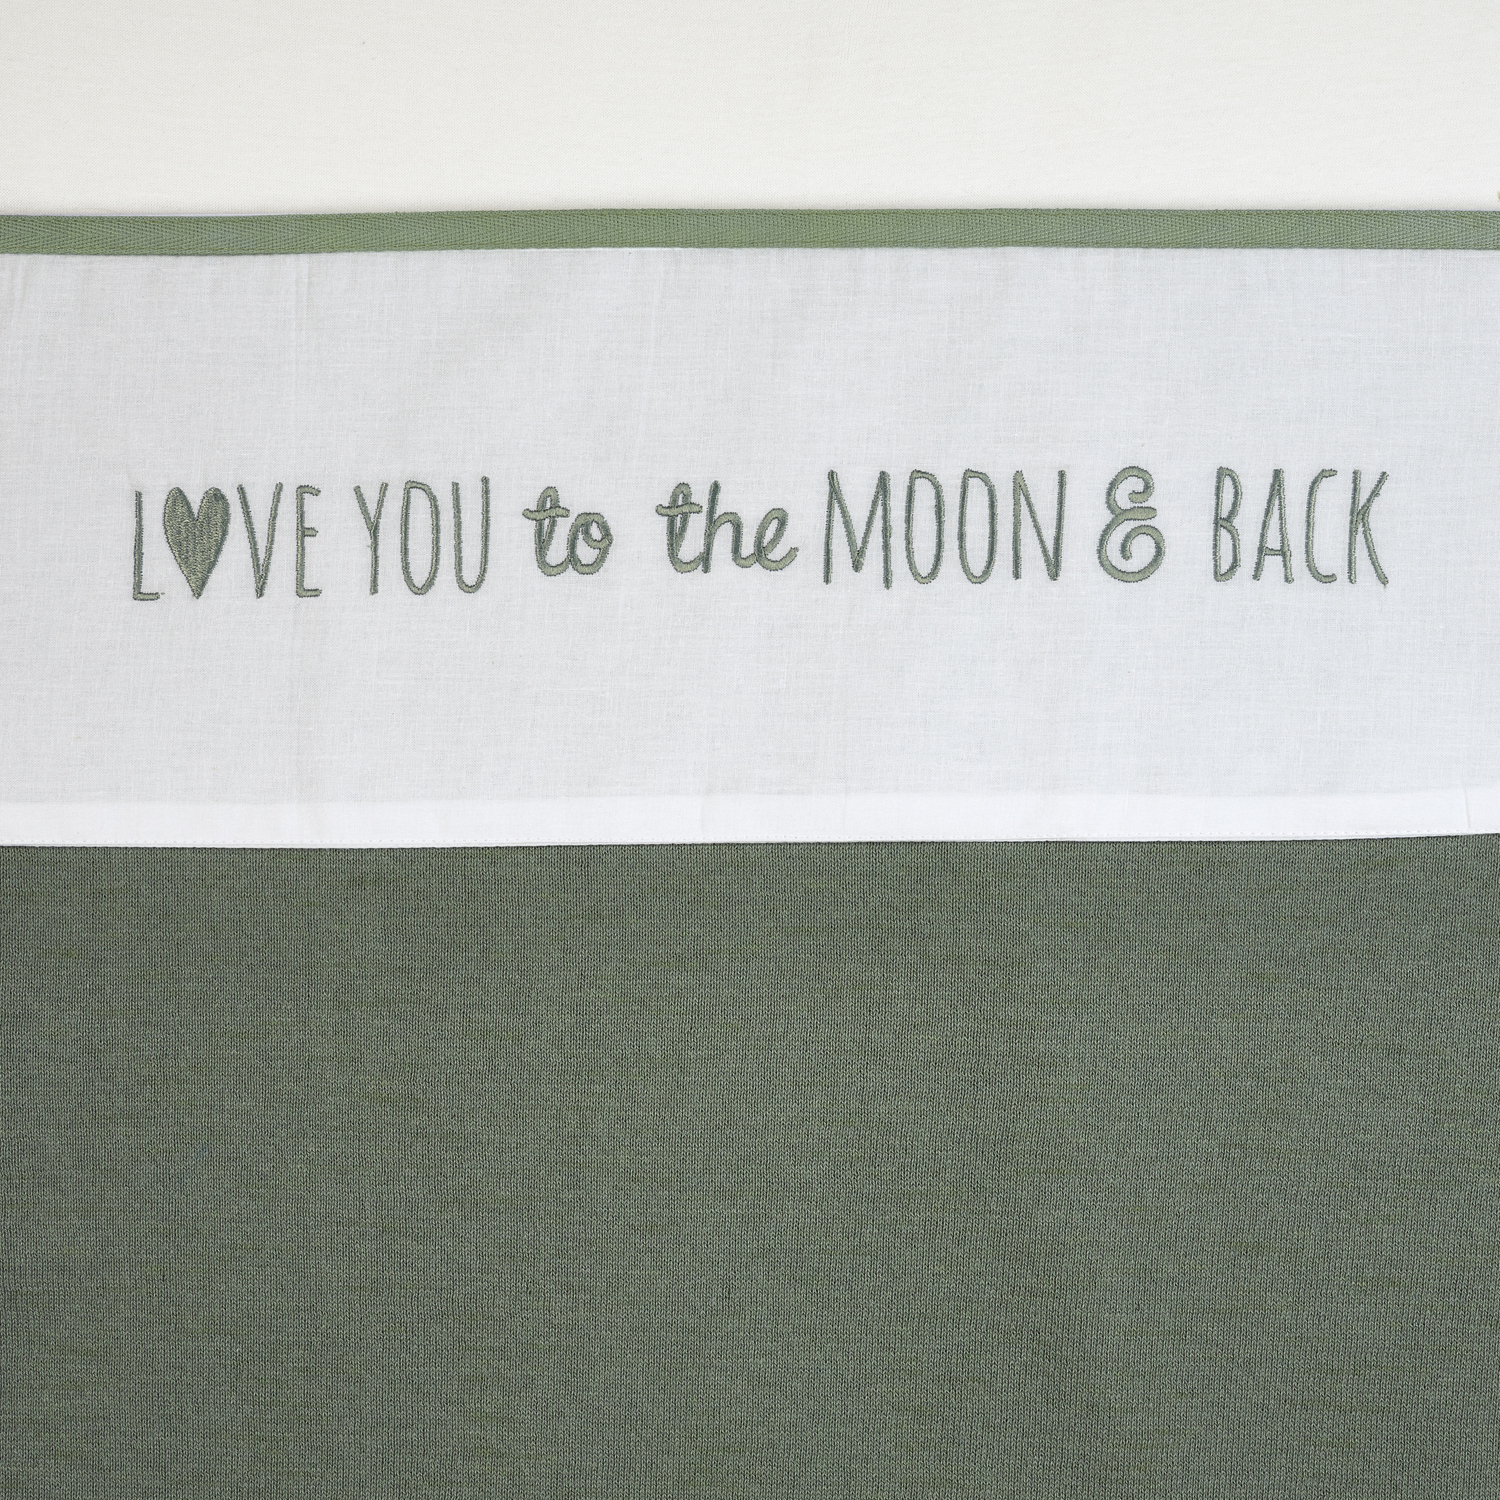 Bettlaken Wiege Love you to the moon & back - forest green - 75x100cm